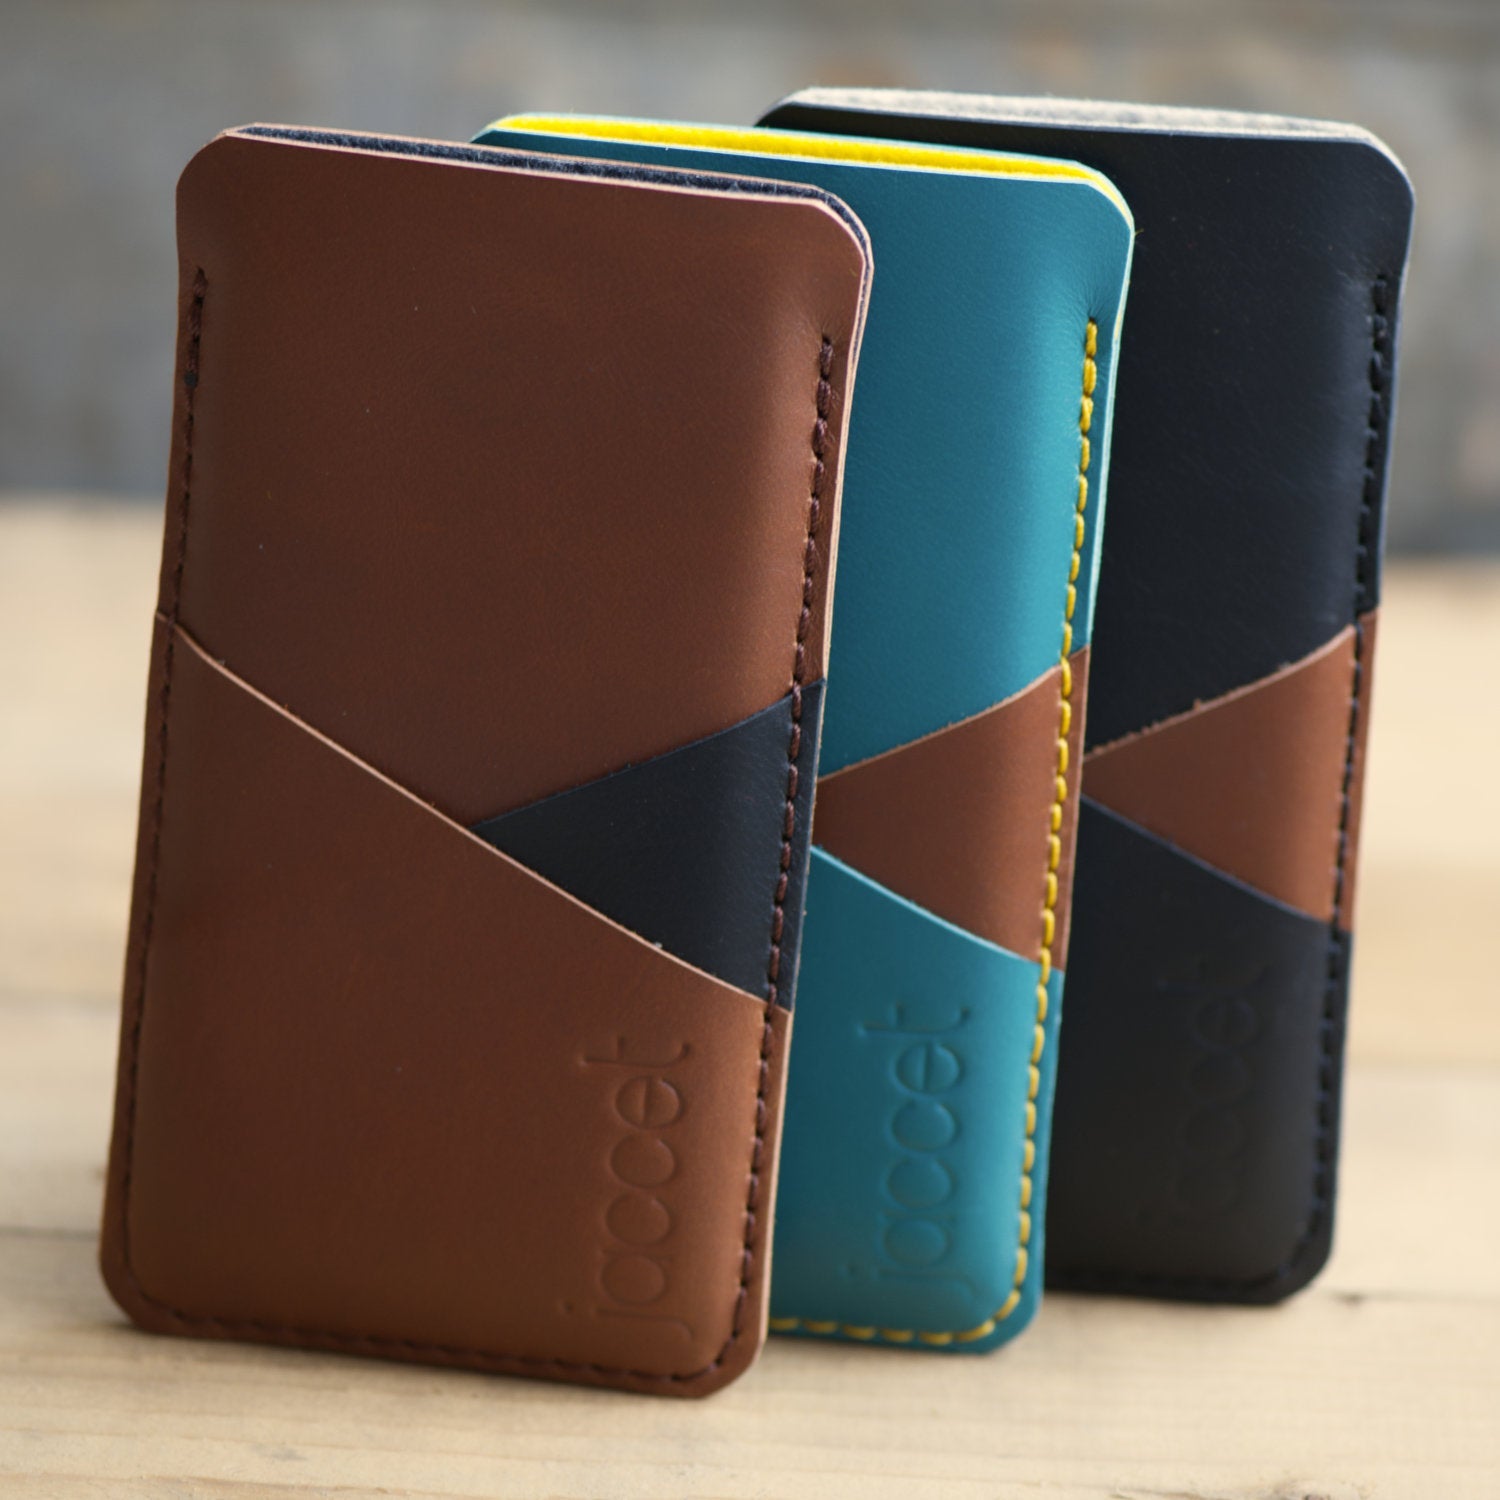 Full-grain leather OPPO sleeve - Brown leather with two pockets voor cards